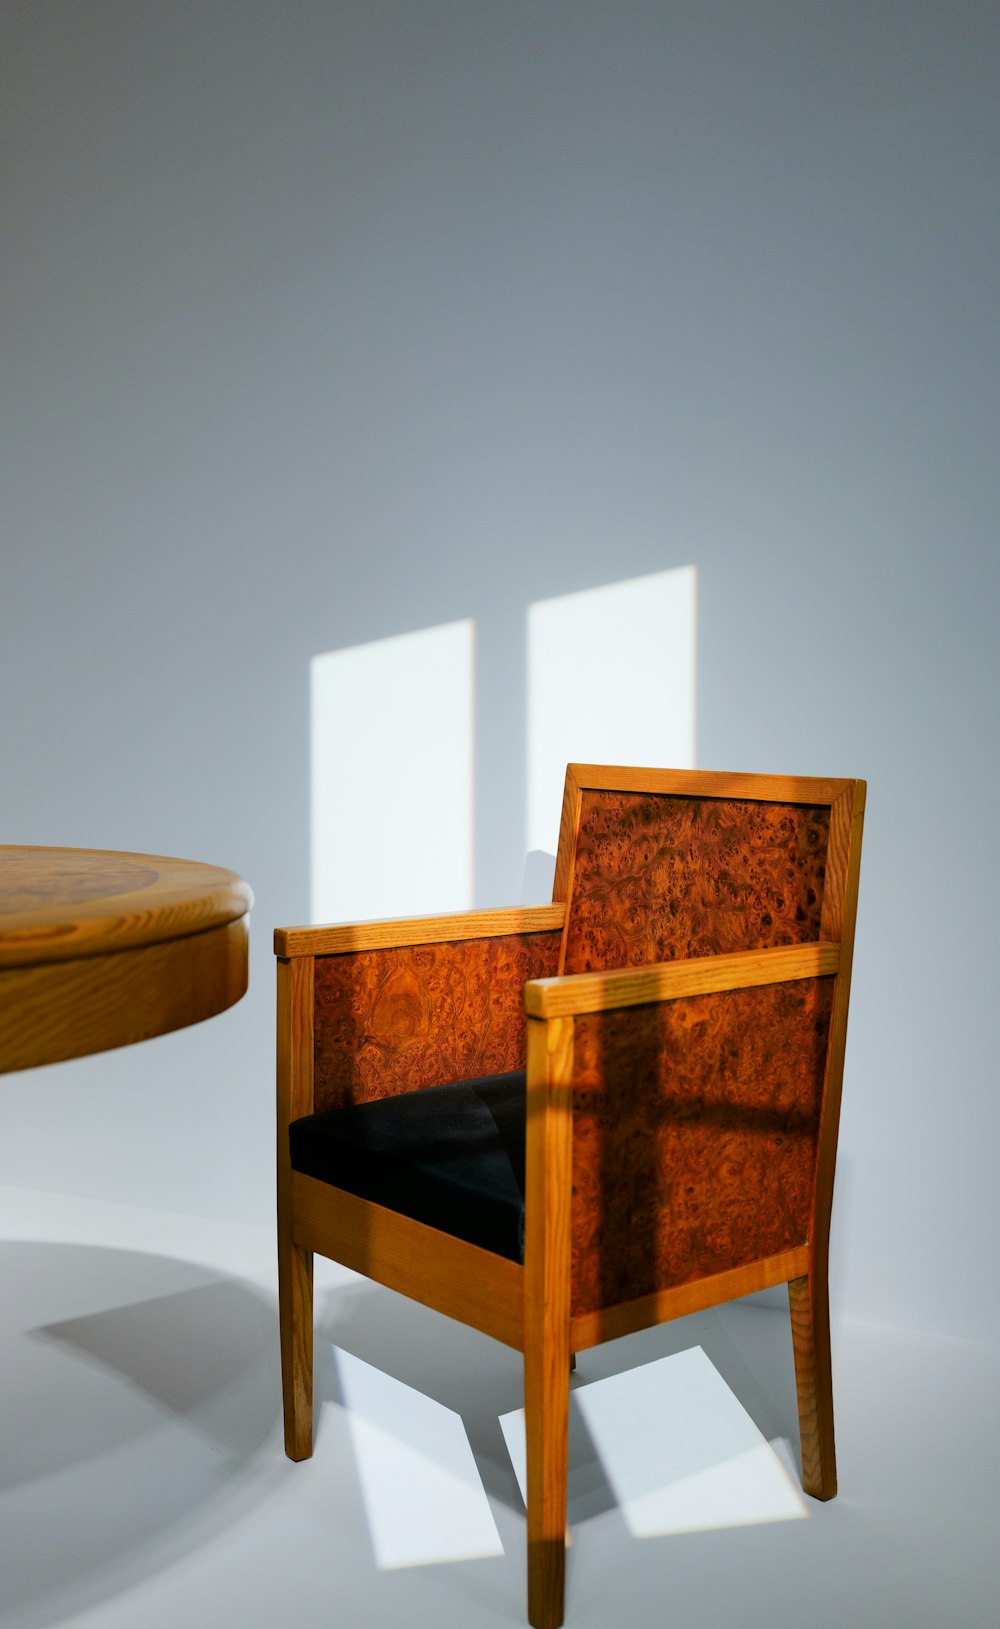 a wooden chair sitting next to a wooden table